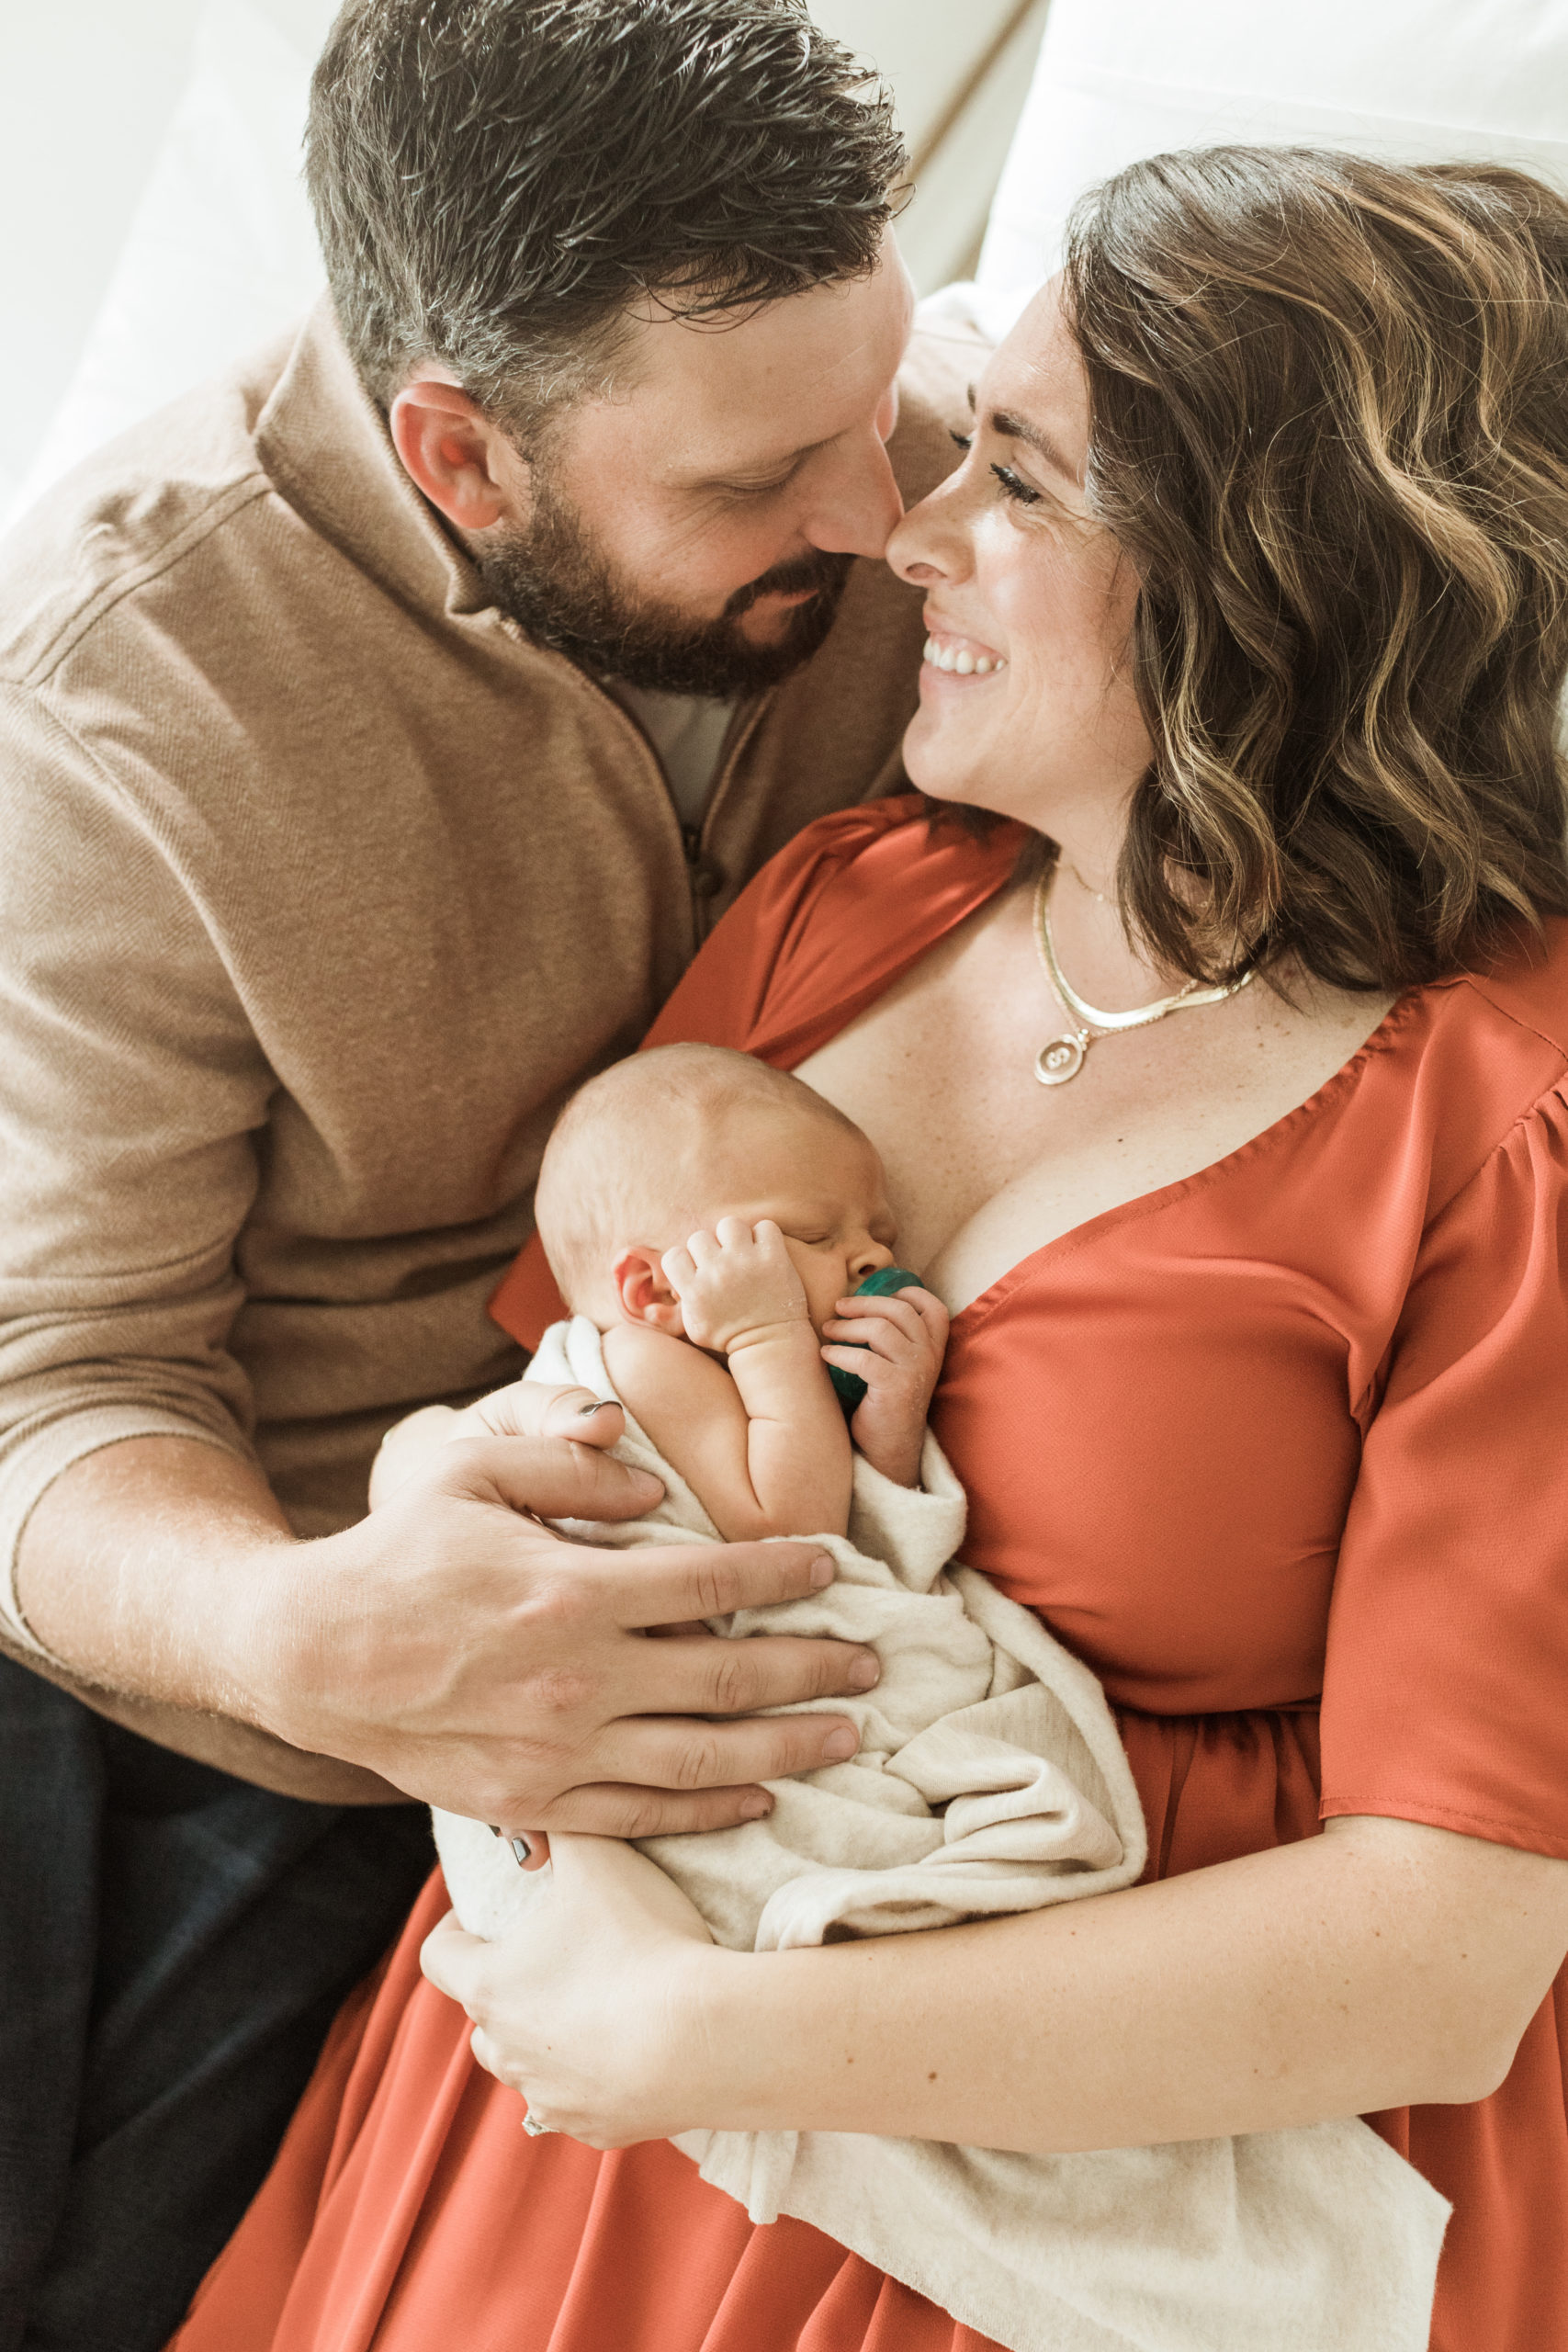 Photo of mom and dad with their newborn baby boy in mamas arms. Both parents are laying on bed, holding baby wrapped in beige blanket and parents looking at each other.